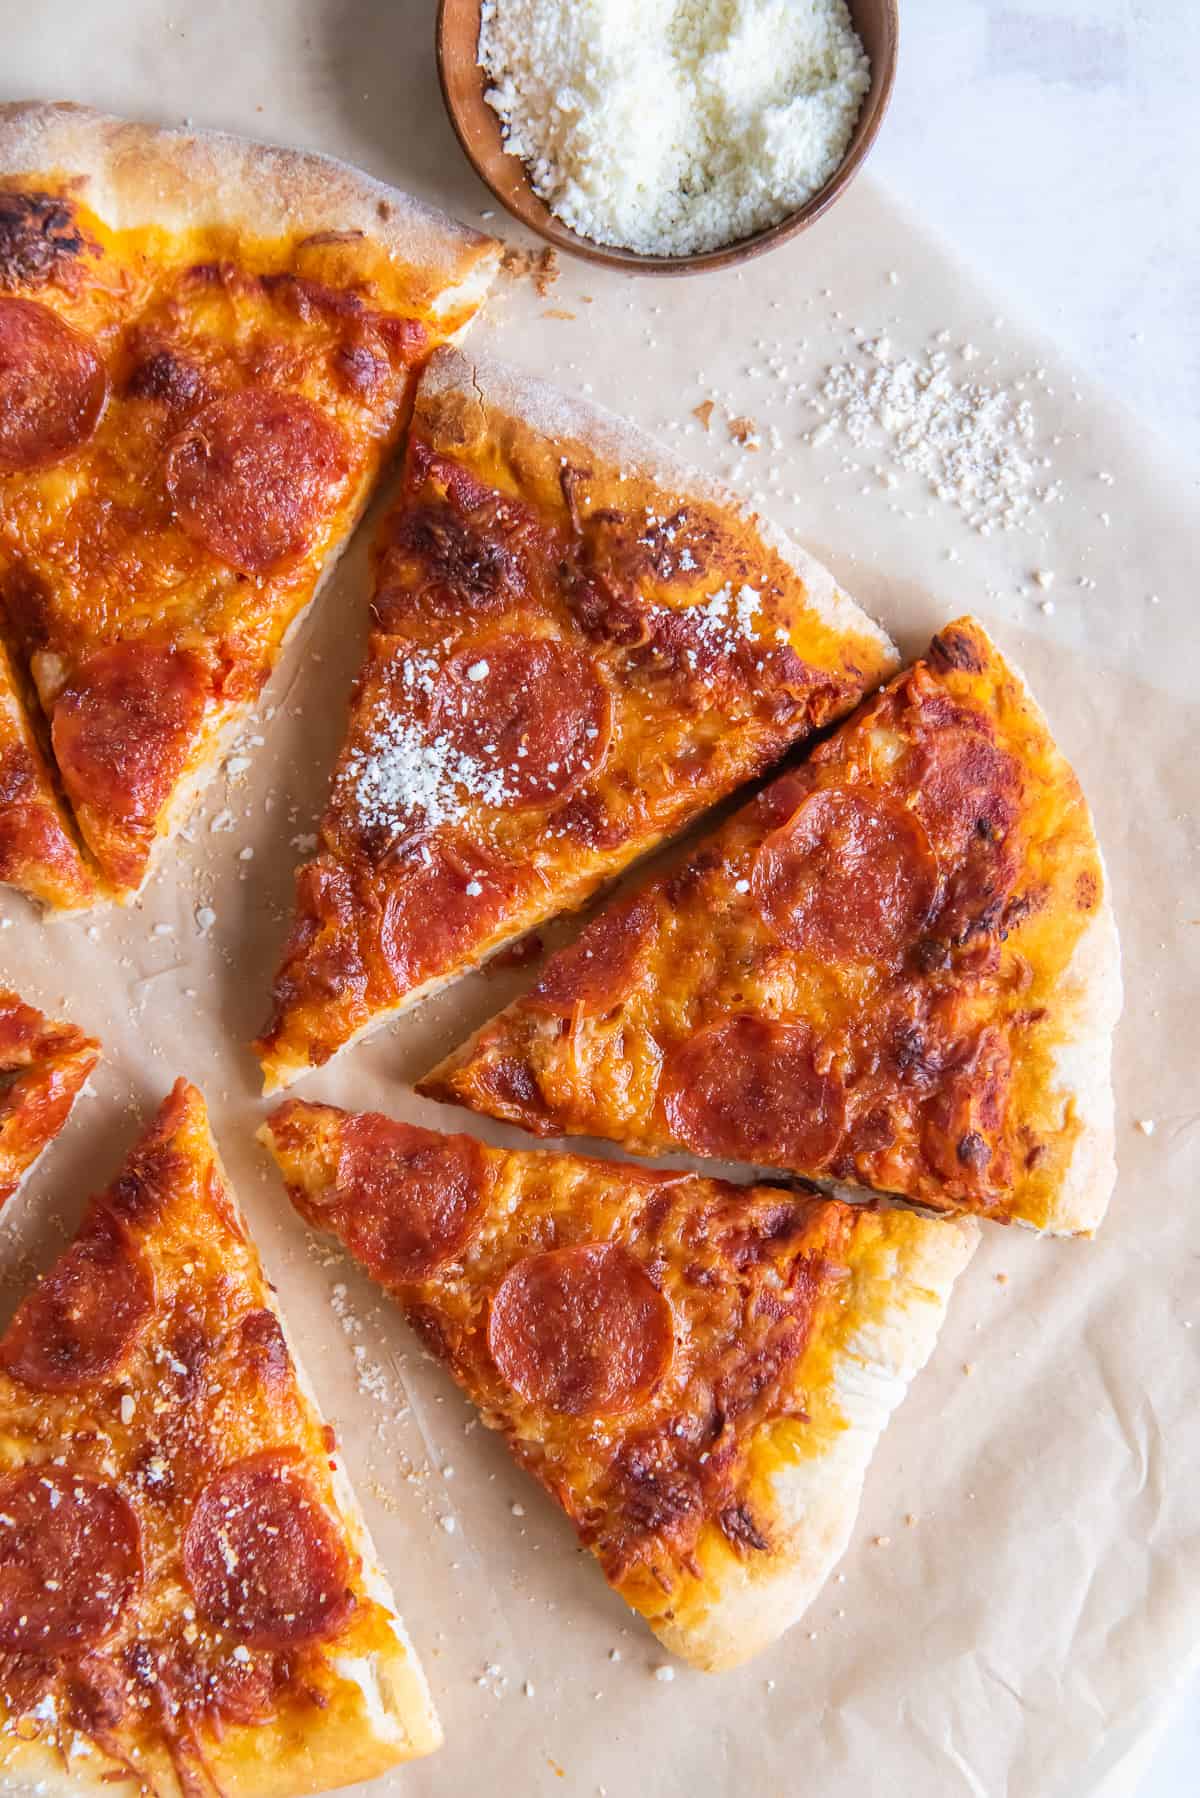 Slices of pepperoni pizza made with homemade pizza crust on parchment paper.